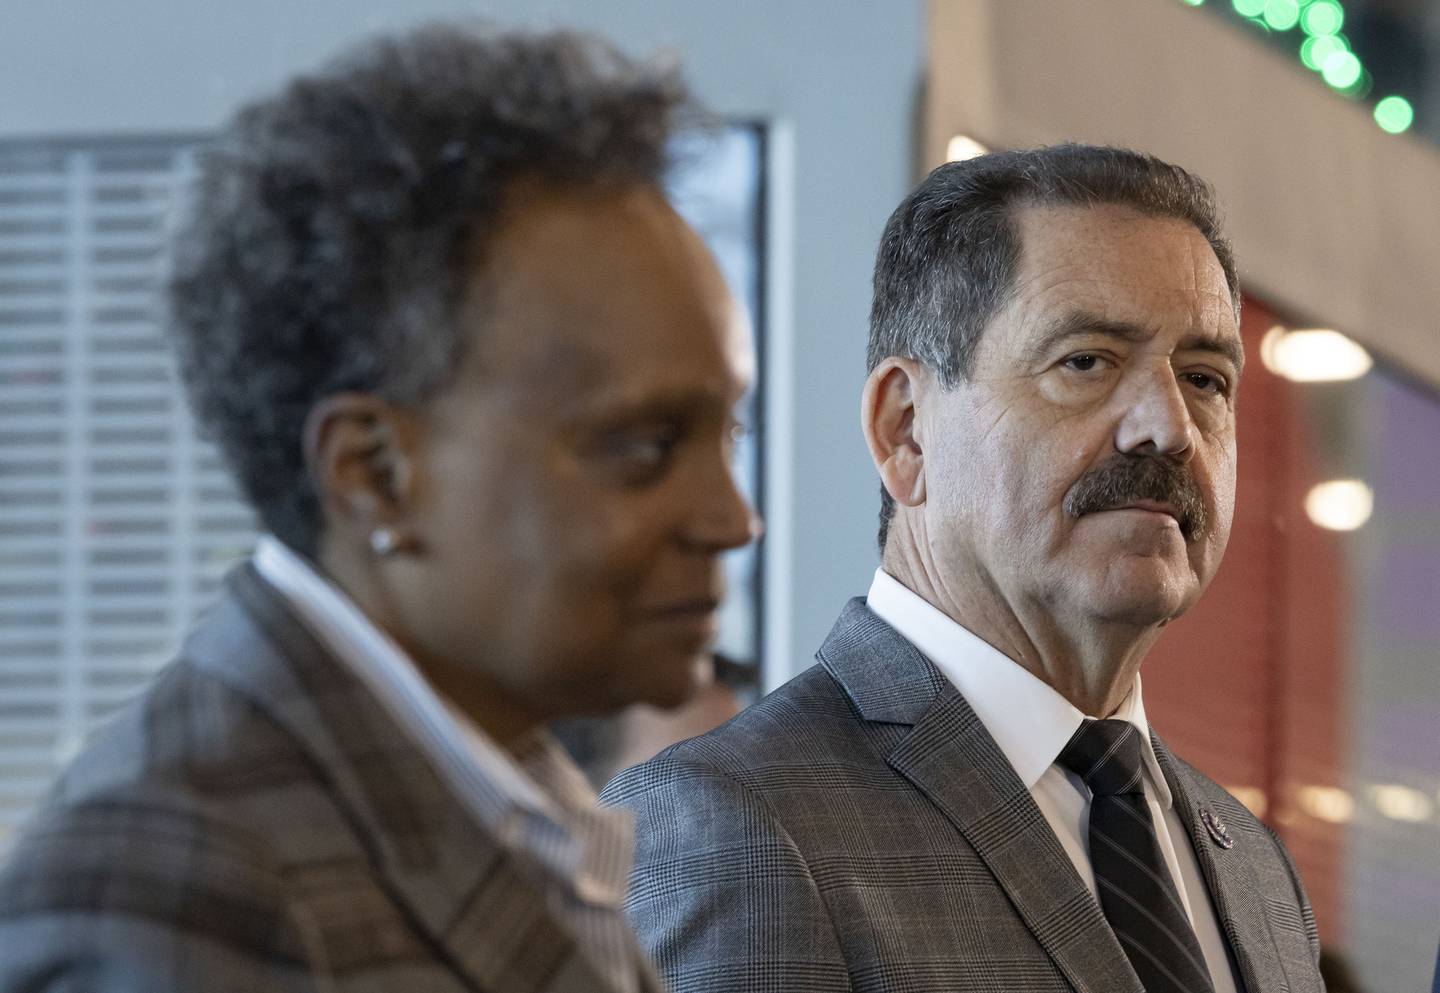 Mayor Lori Lightfoot and U.S. Rep. Jesús “Chuy” García appear together at an announcement about the O'Hare International Airport modernization project on Nov. 21, 2022, while other candidates were filing their nominating petitions. 